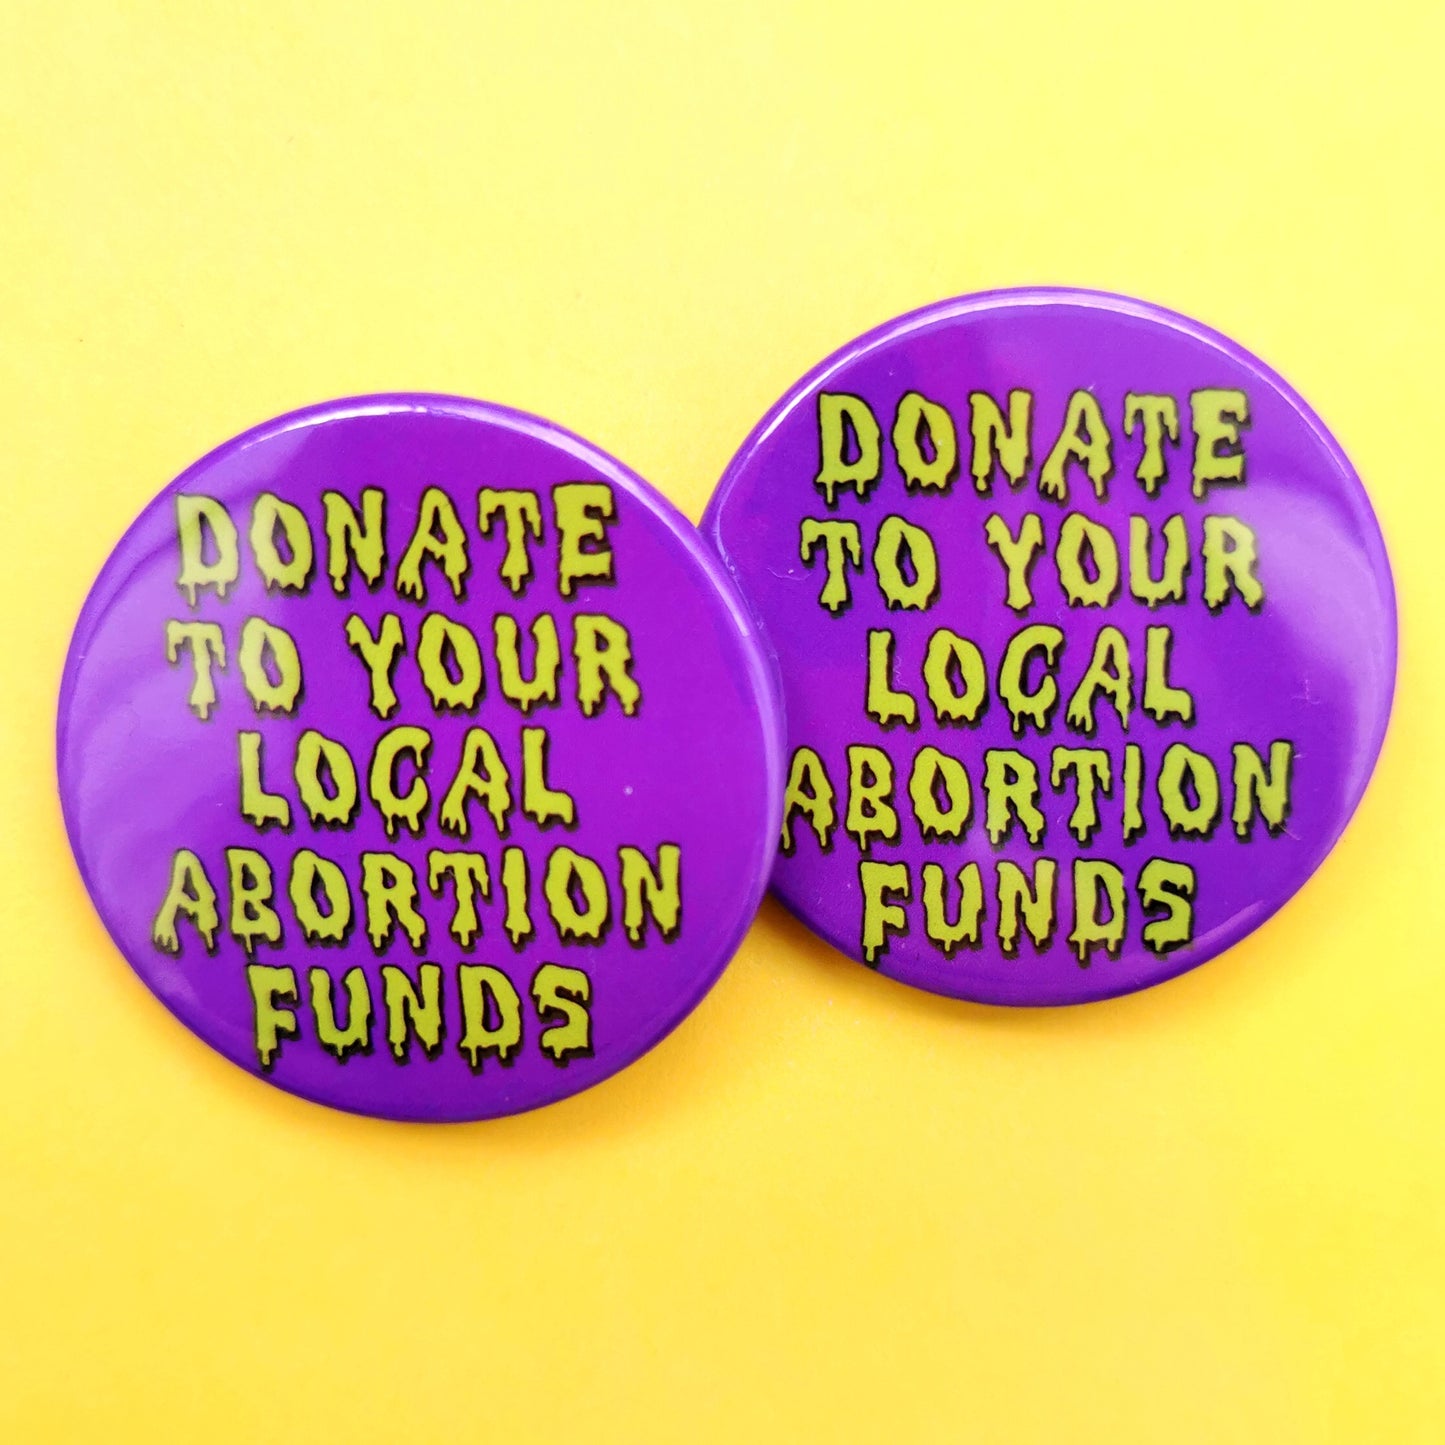 Donate To Your Local Abortion Funds badge